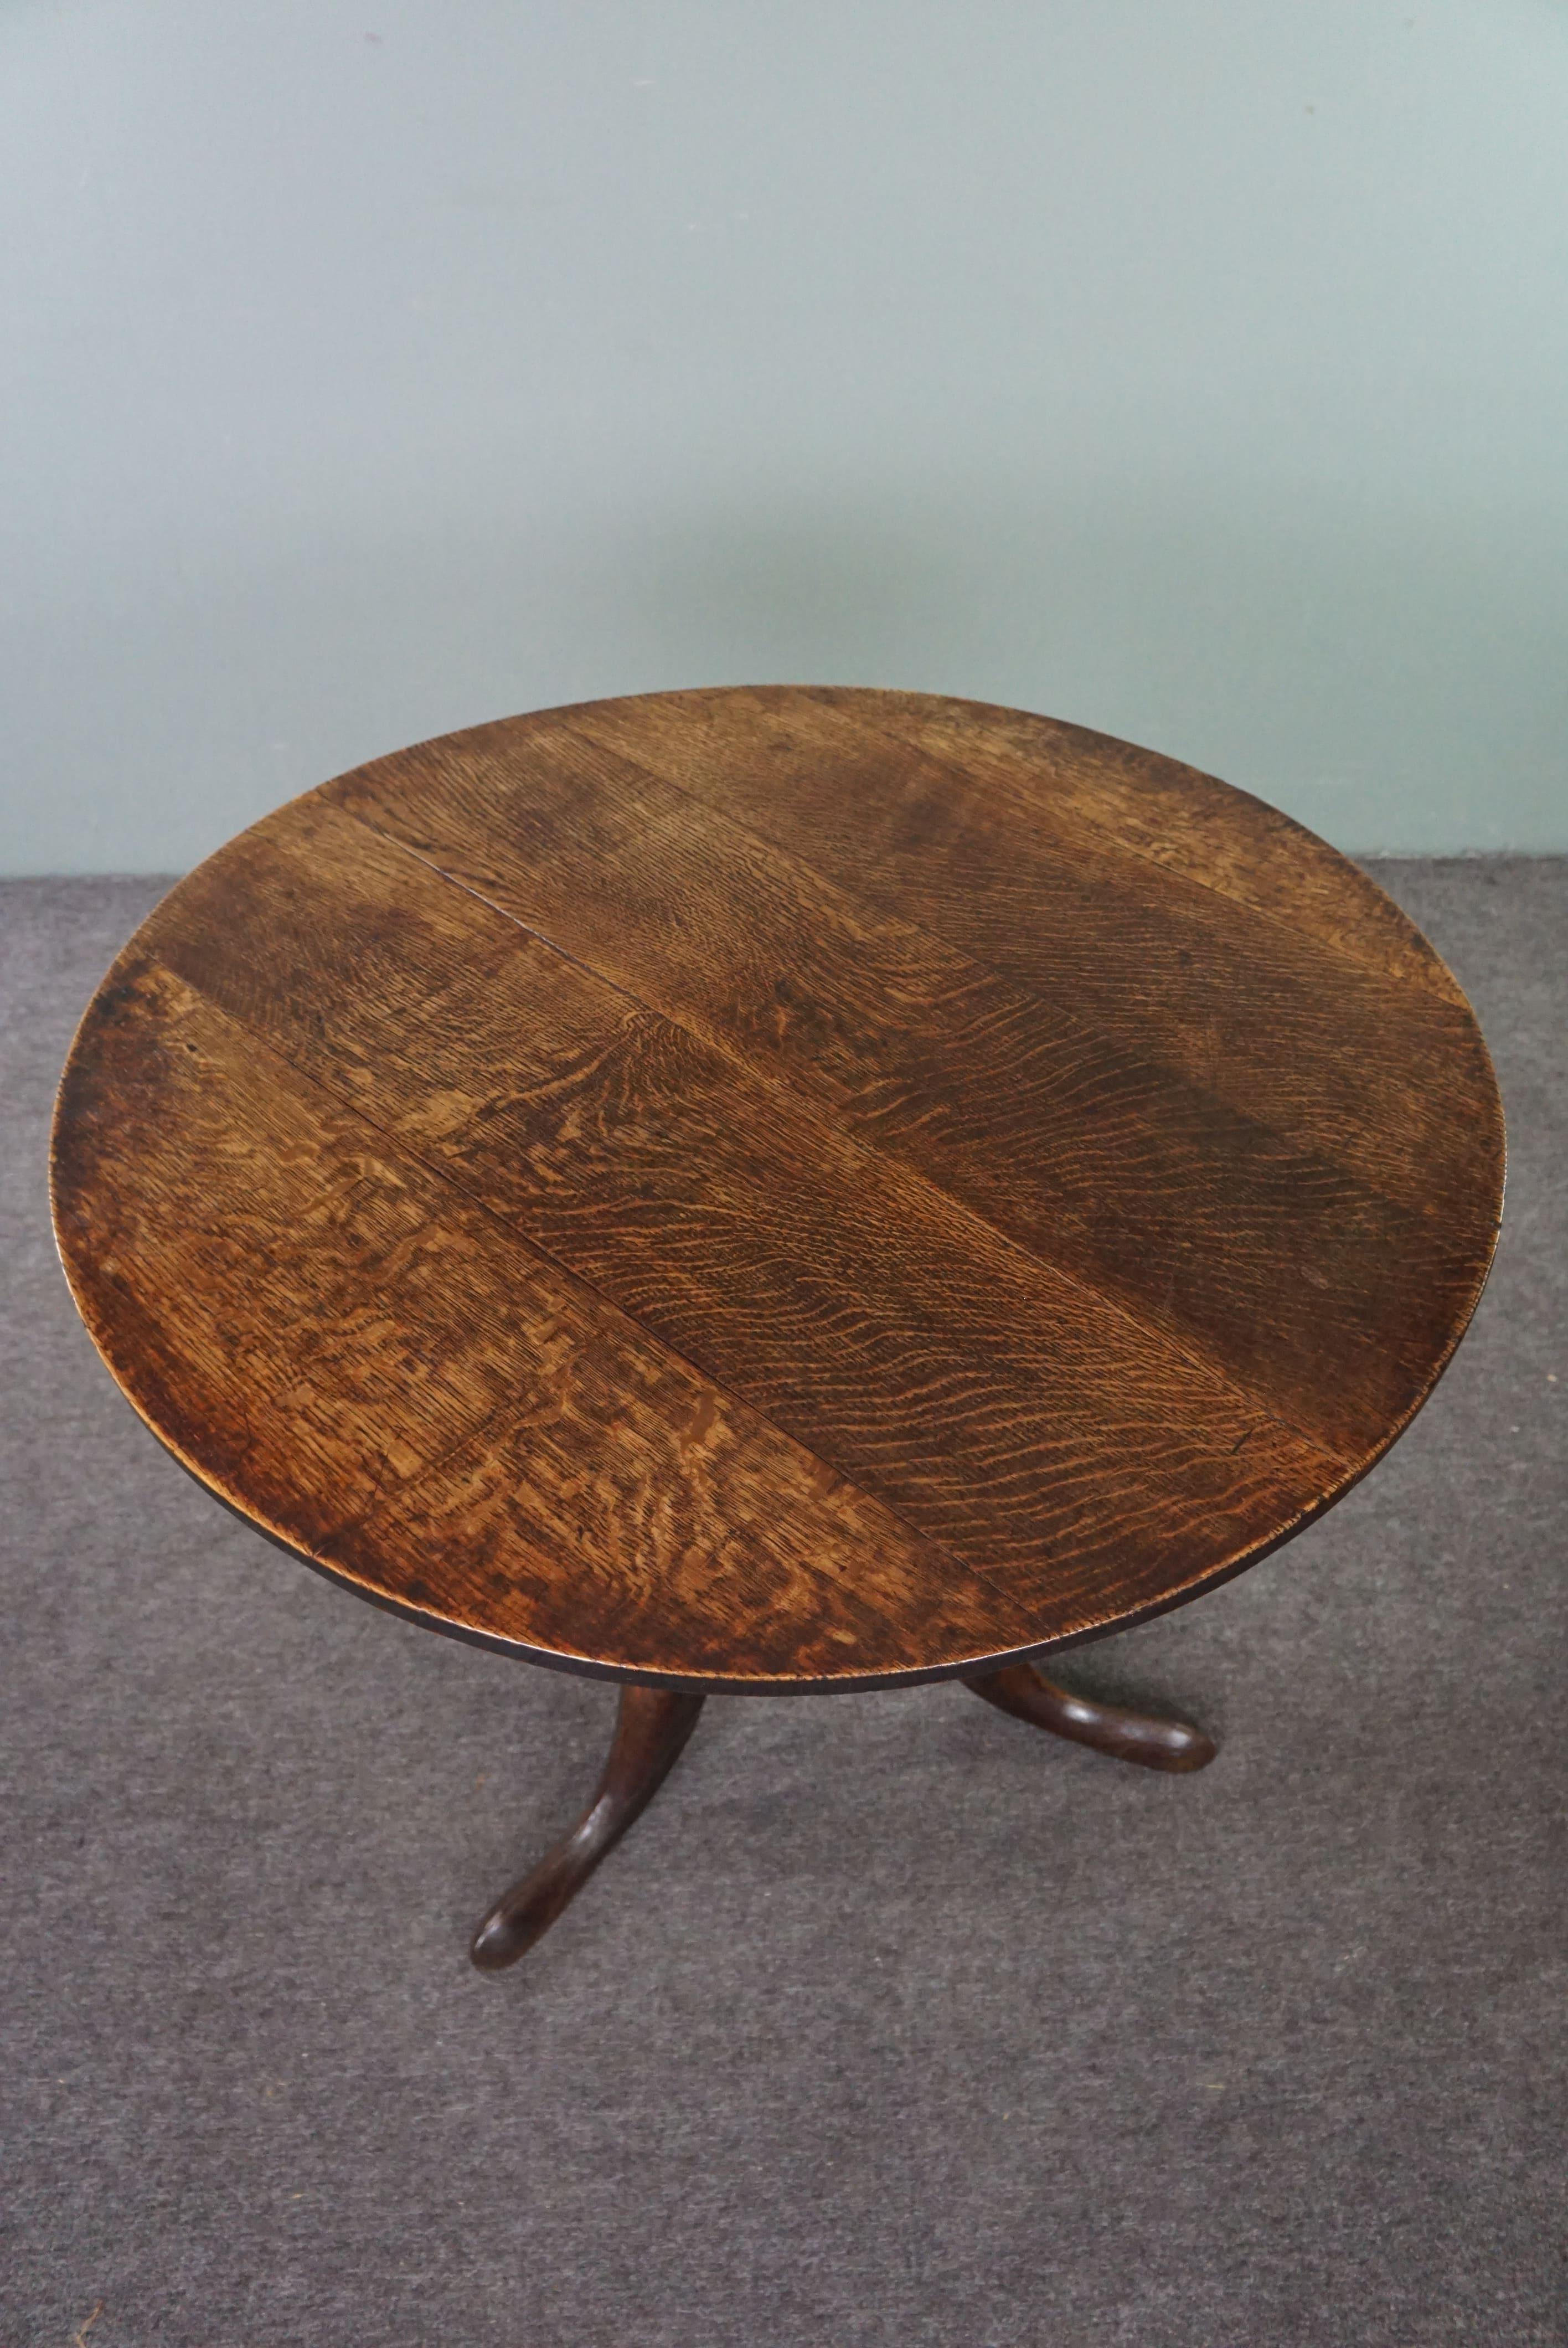 Offered is this beautifully stunning antique English tilt-top table from the 18th century. This gorgeous English tilt-top table is in good and proper condition. Due to its folding mechanism, it is easy to fold up and set aside if extra space is